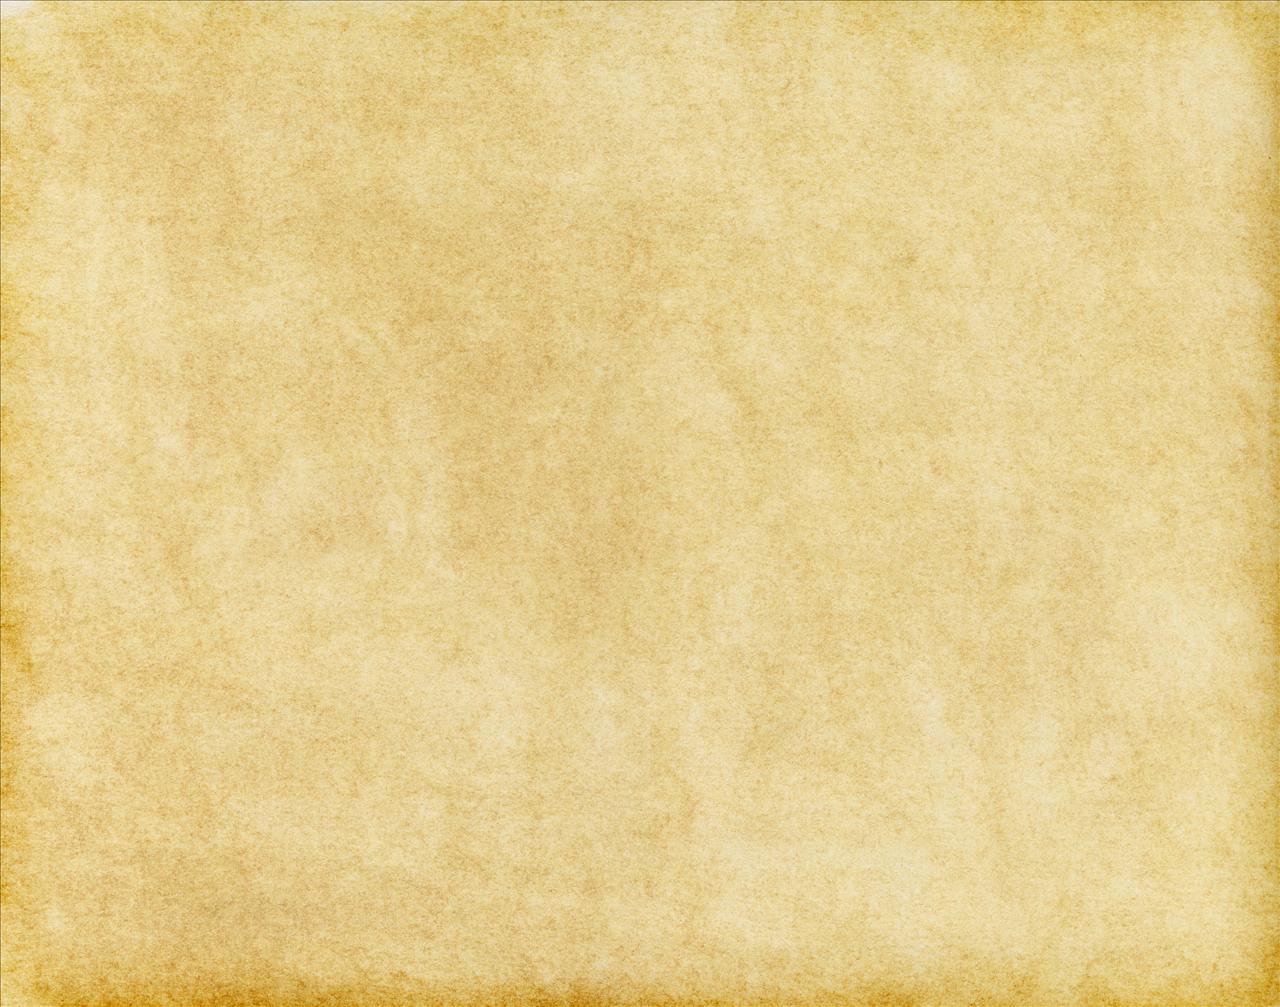 Free Backgrounds of Old Vintage Paper